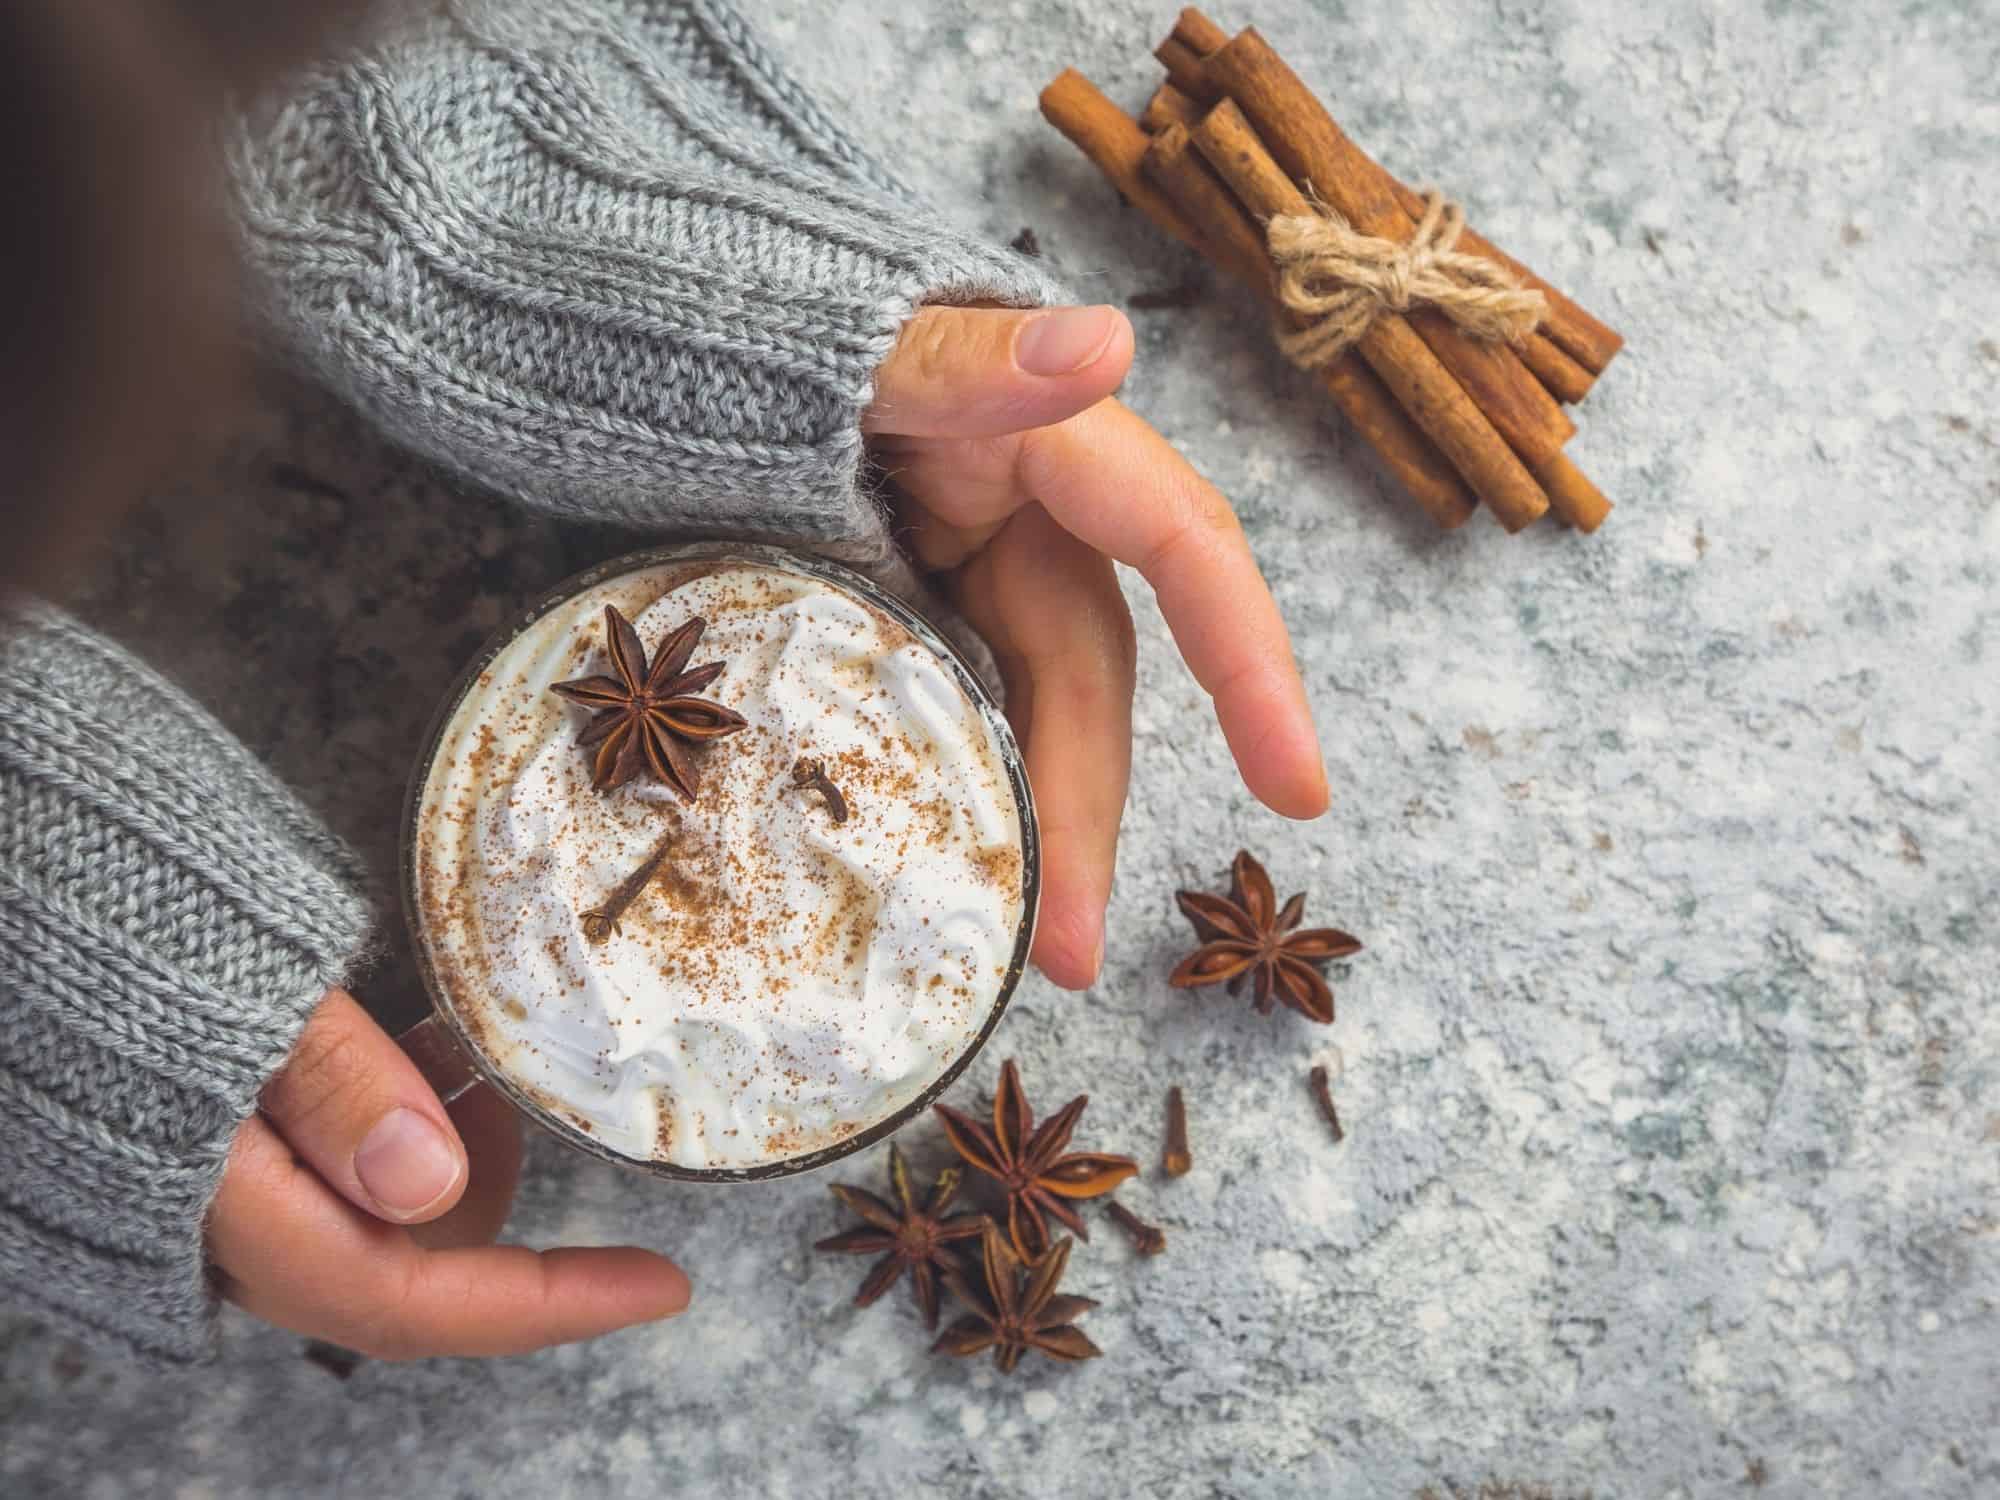 Hands holding a warm cup of chai tea latte with cinnamon sticks and star anise.